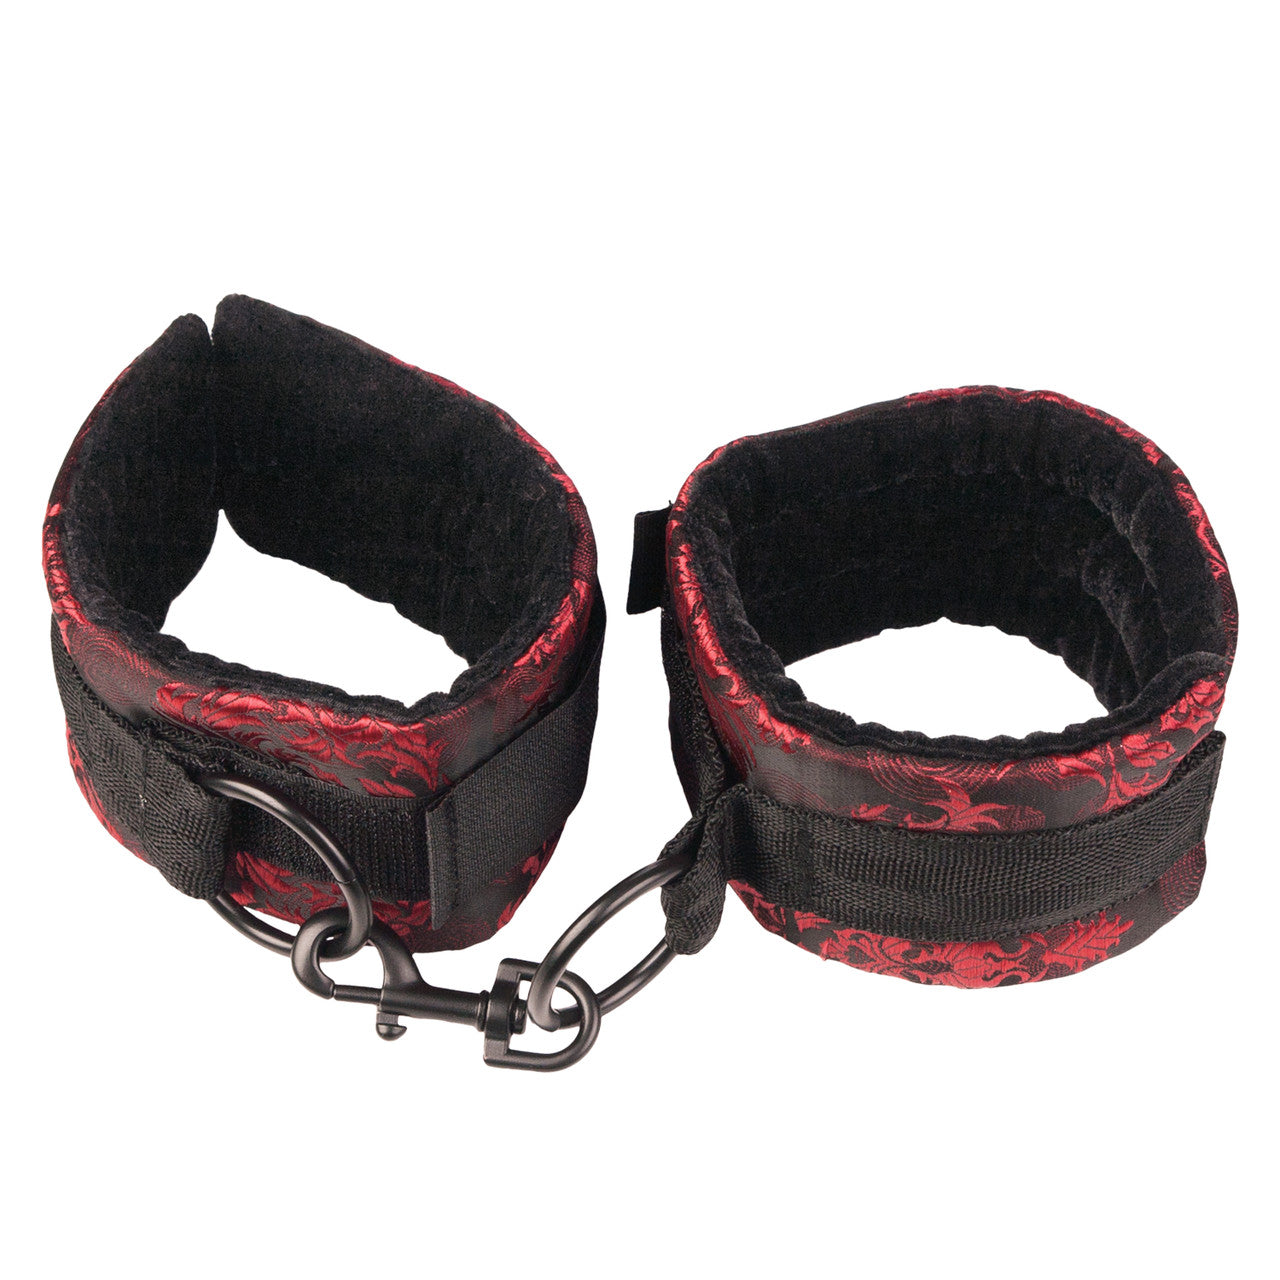 Scandal Universal Cuffs - Thorn & Feather Sex Toy Canada